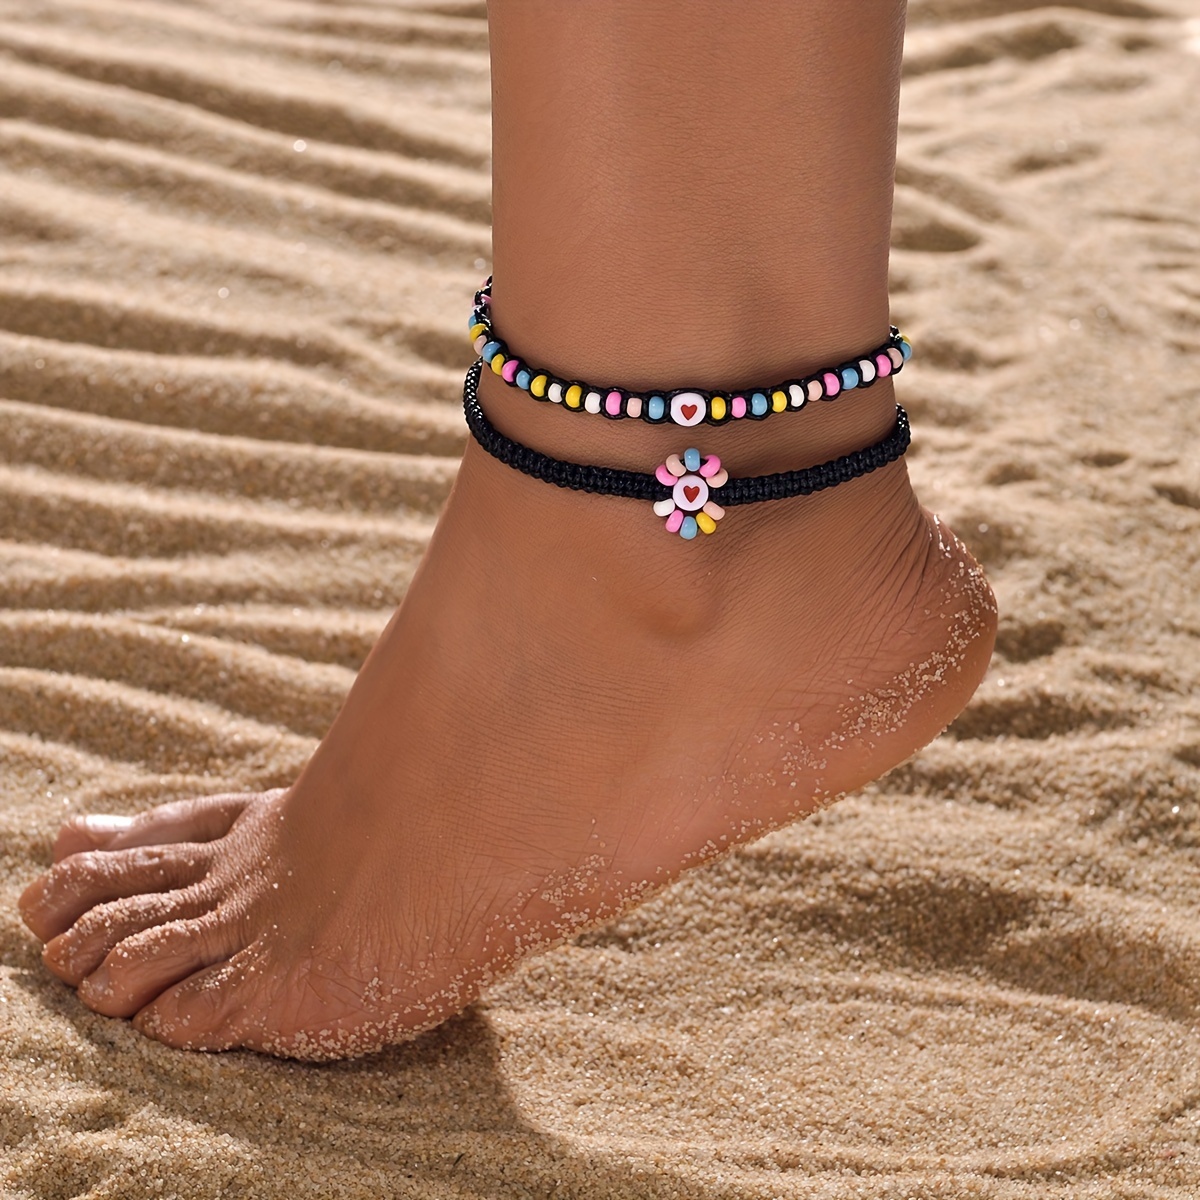 

2 Pcs Set Of Delicate Rainbow Rice Beads Flower Design Anklet Bohemian Elegant Style Stackable Adjustable Female Foot Chain